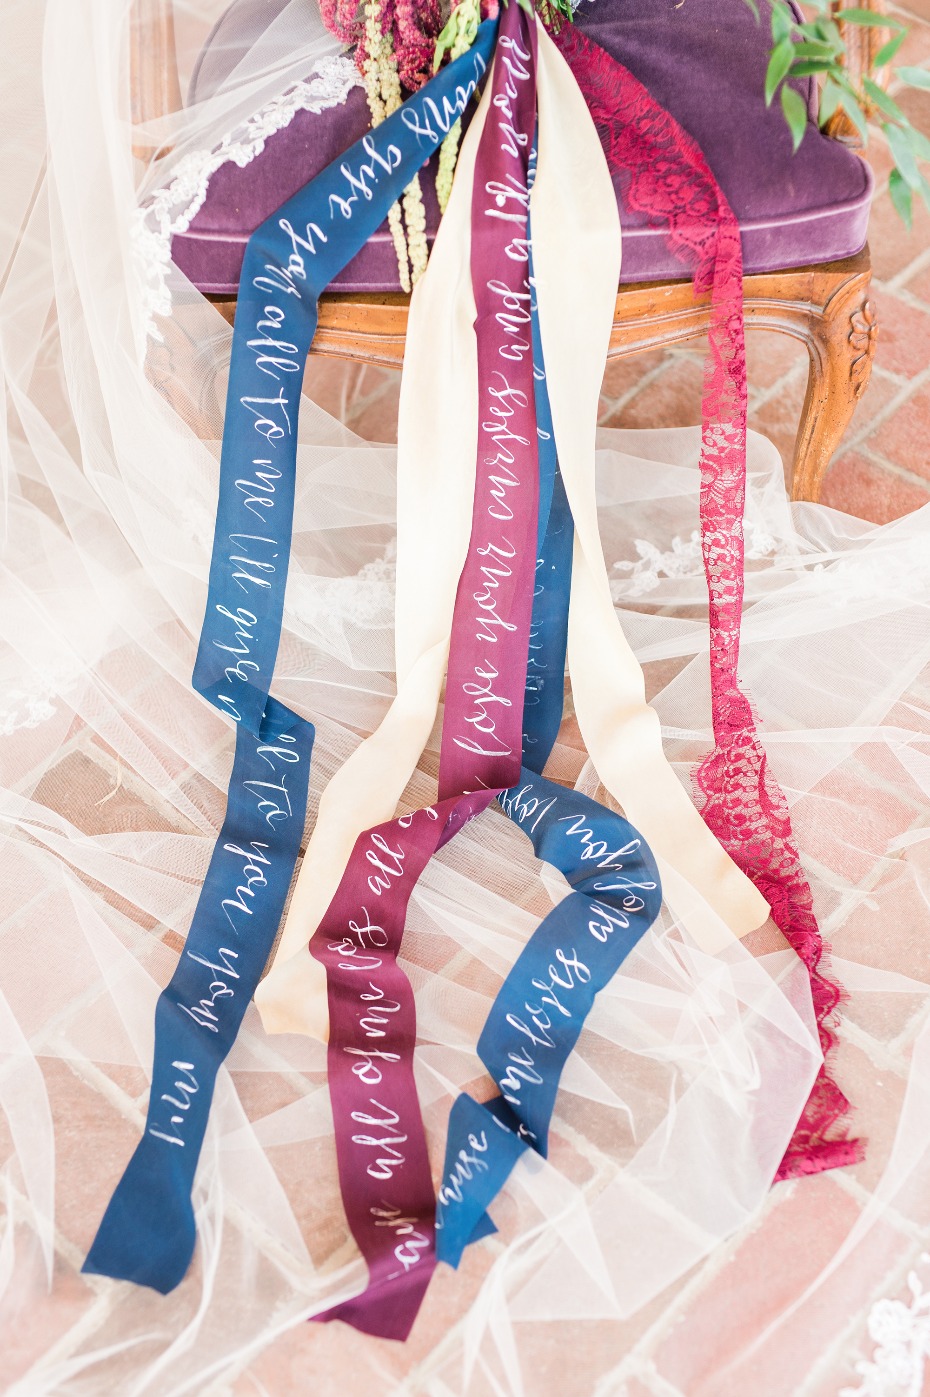 Bouquet ribbons with calligraphy